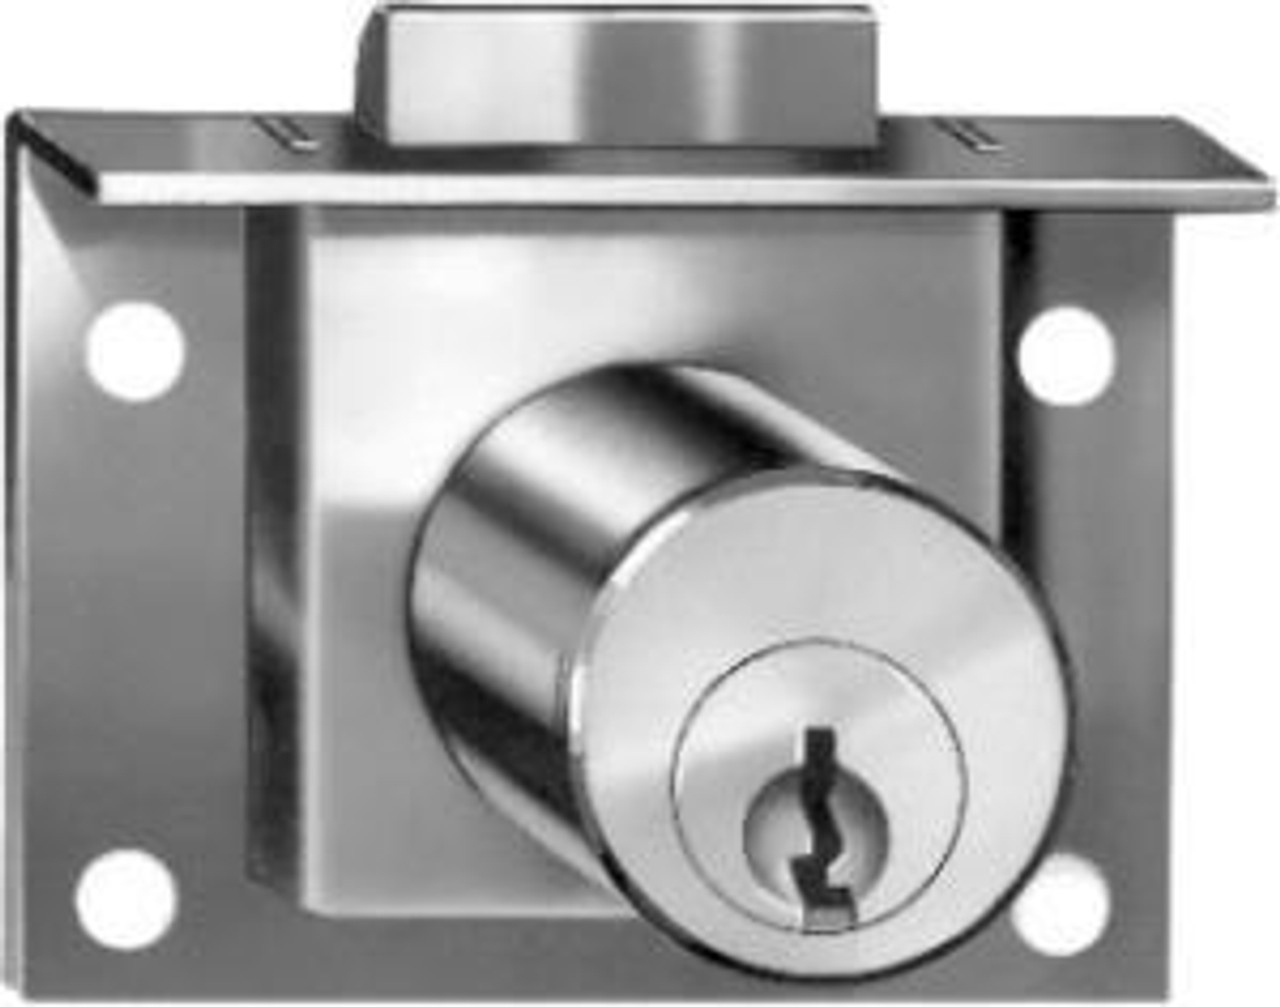 Compx Security Products Compx C8131 Pin Tumbler Drawer Lock 7/8" Cylinder Spring type Bolt with 7/32" Bolt Travel 